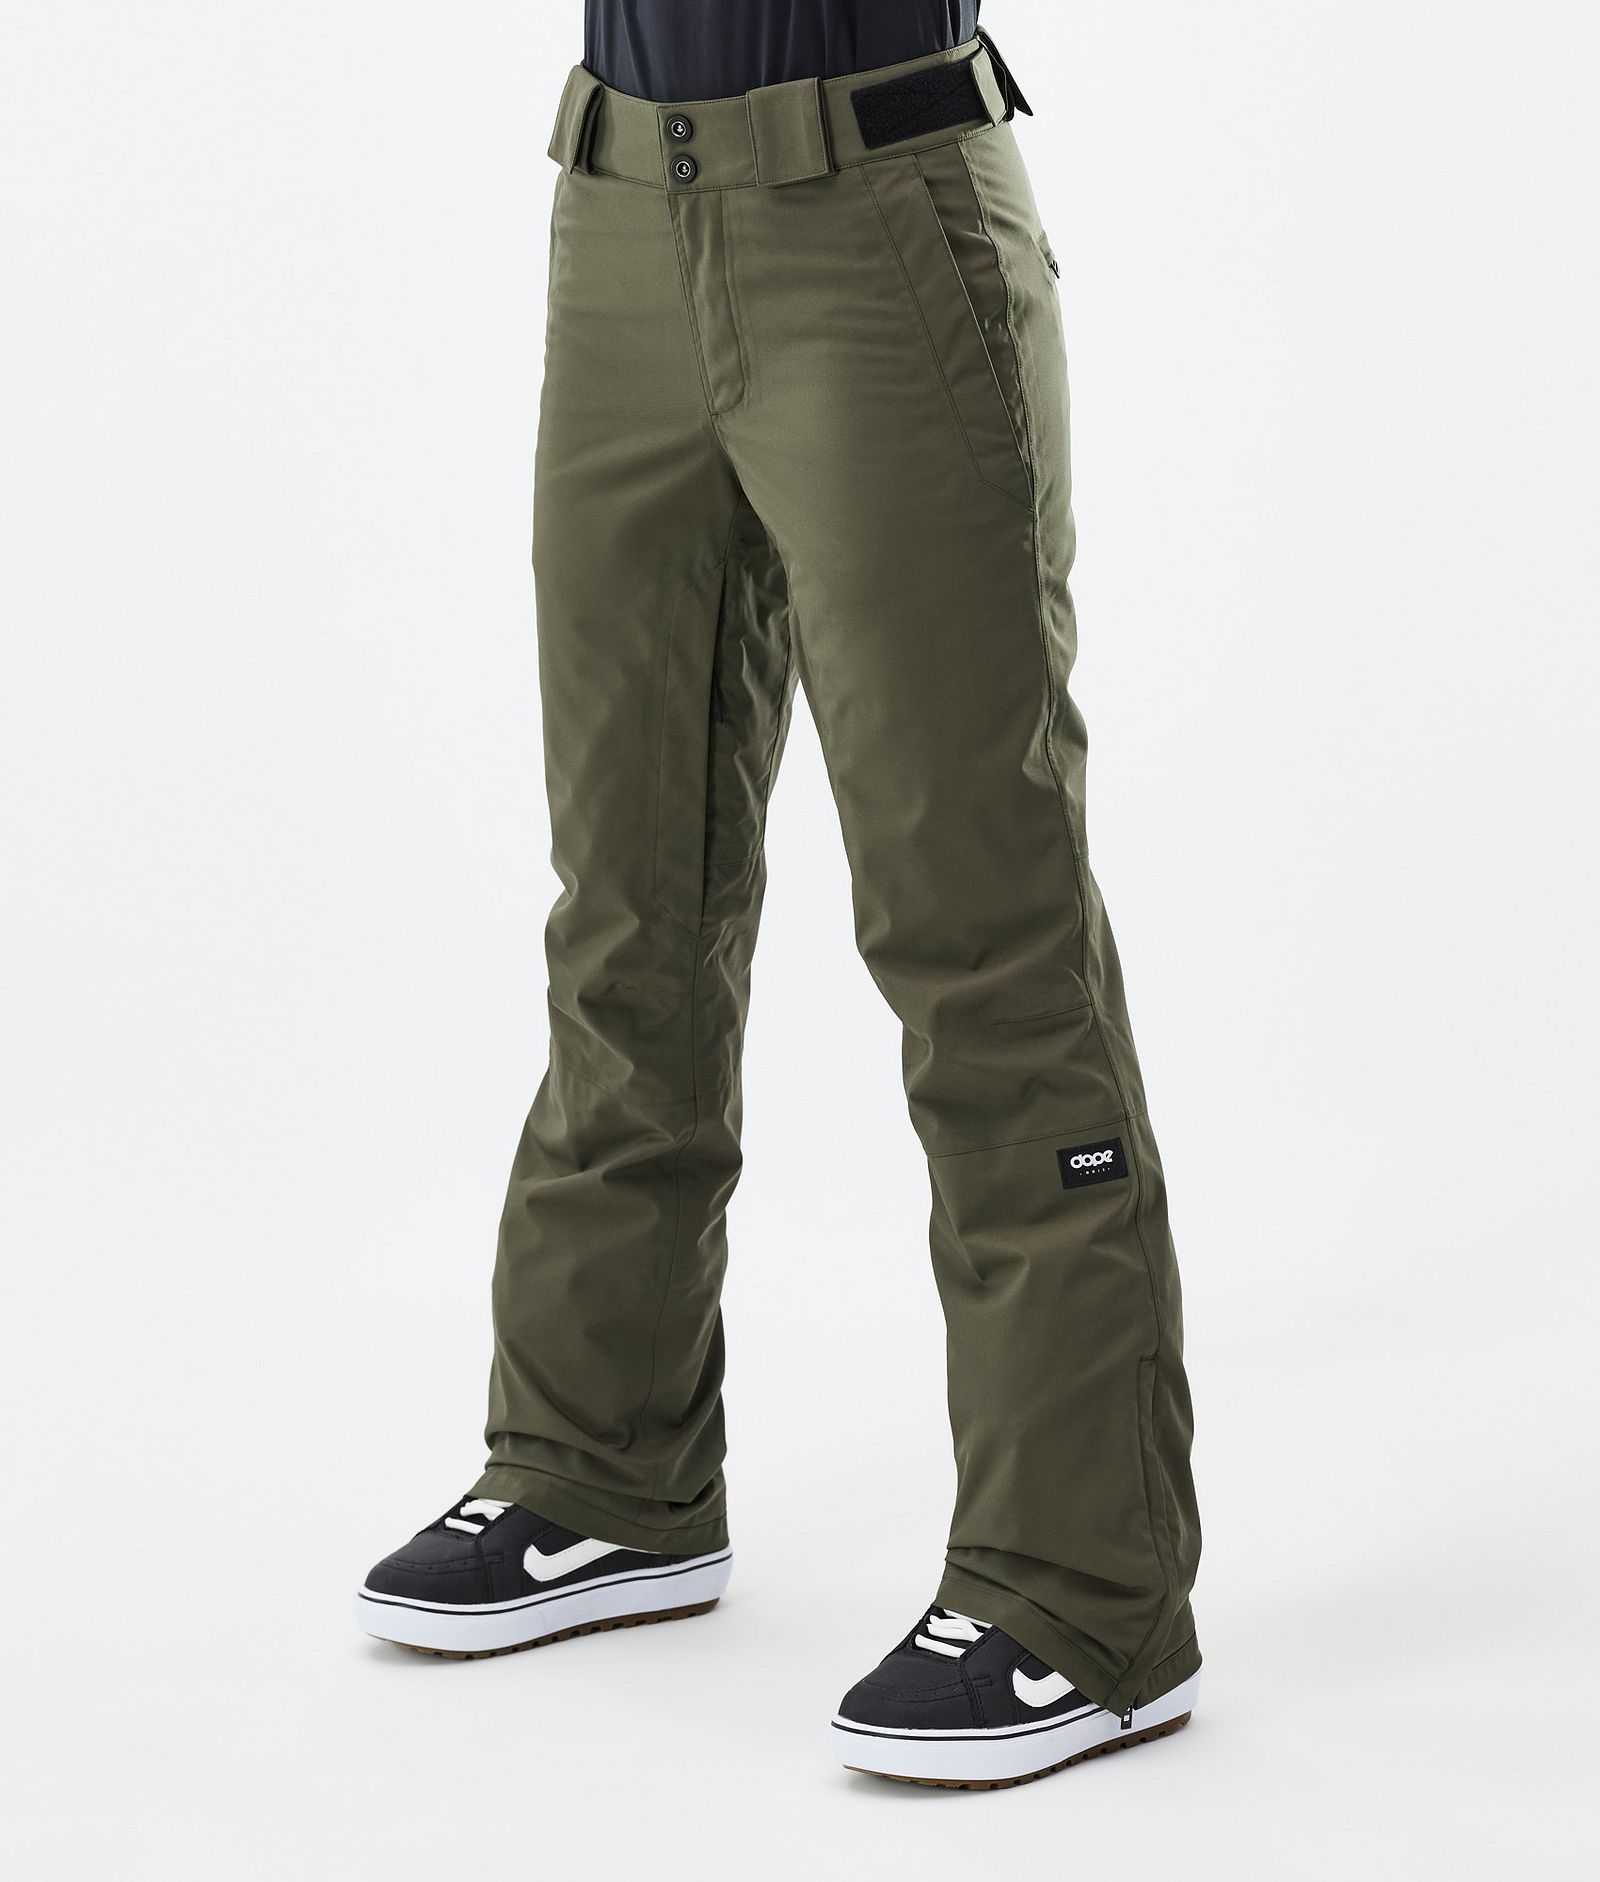 Dope Con W Women's Snowboard Pants Olive Green